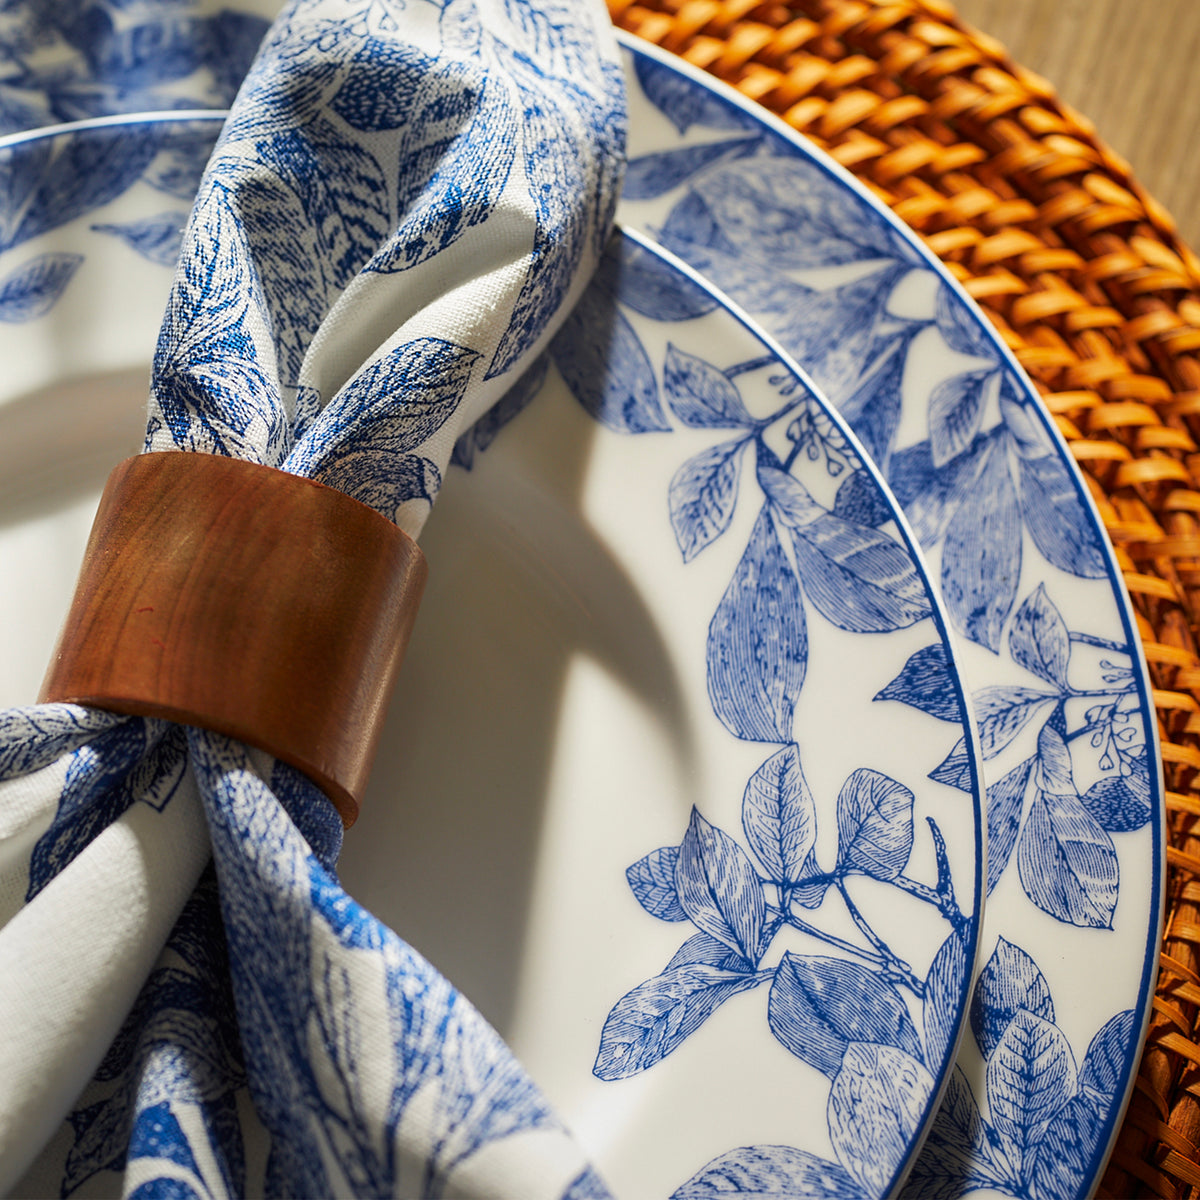 Close-up of a table setting with heirloom-quality dinnerware featuring Caskata Artisanal Home Arbor Rimmed Dinner Plate blue floral-patterned plates, a napkin with a similar design held by a wooden ring, and a woven placemat beneath.